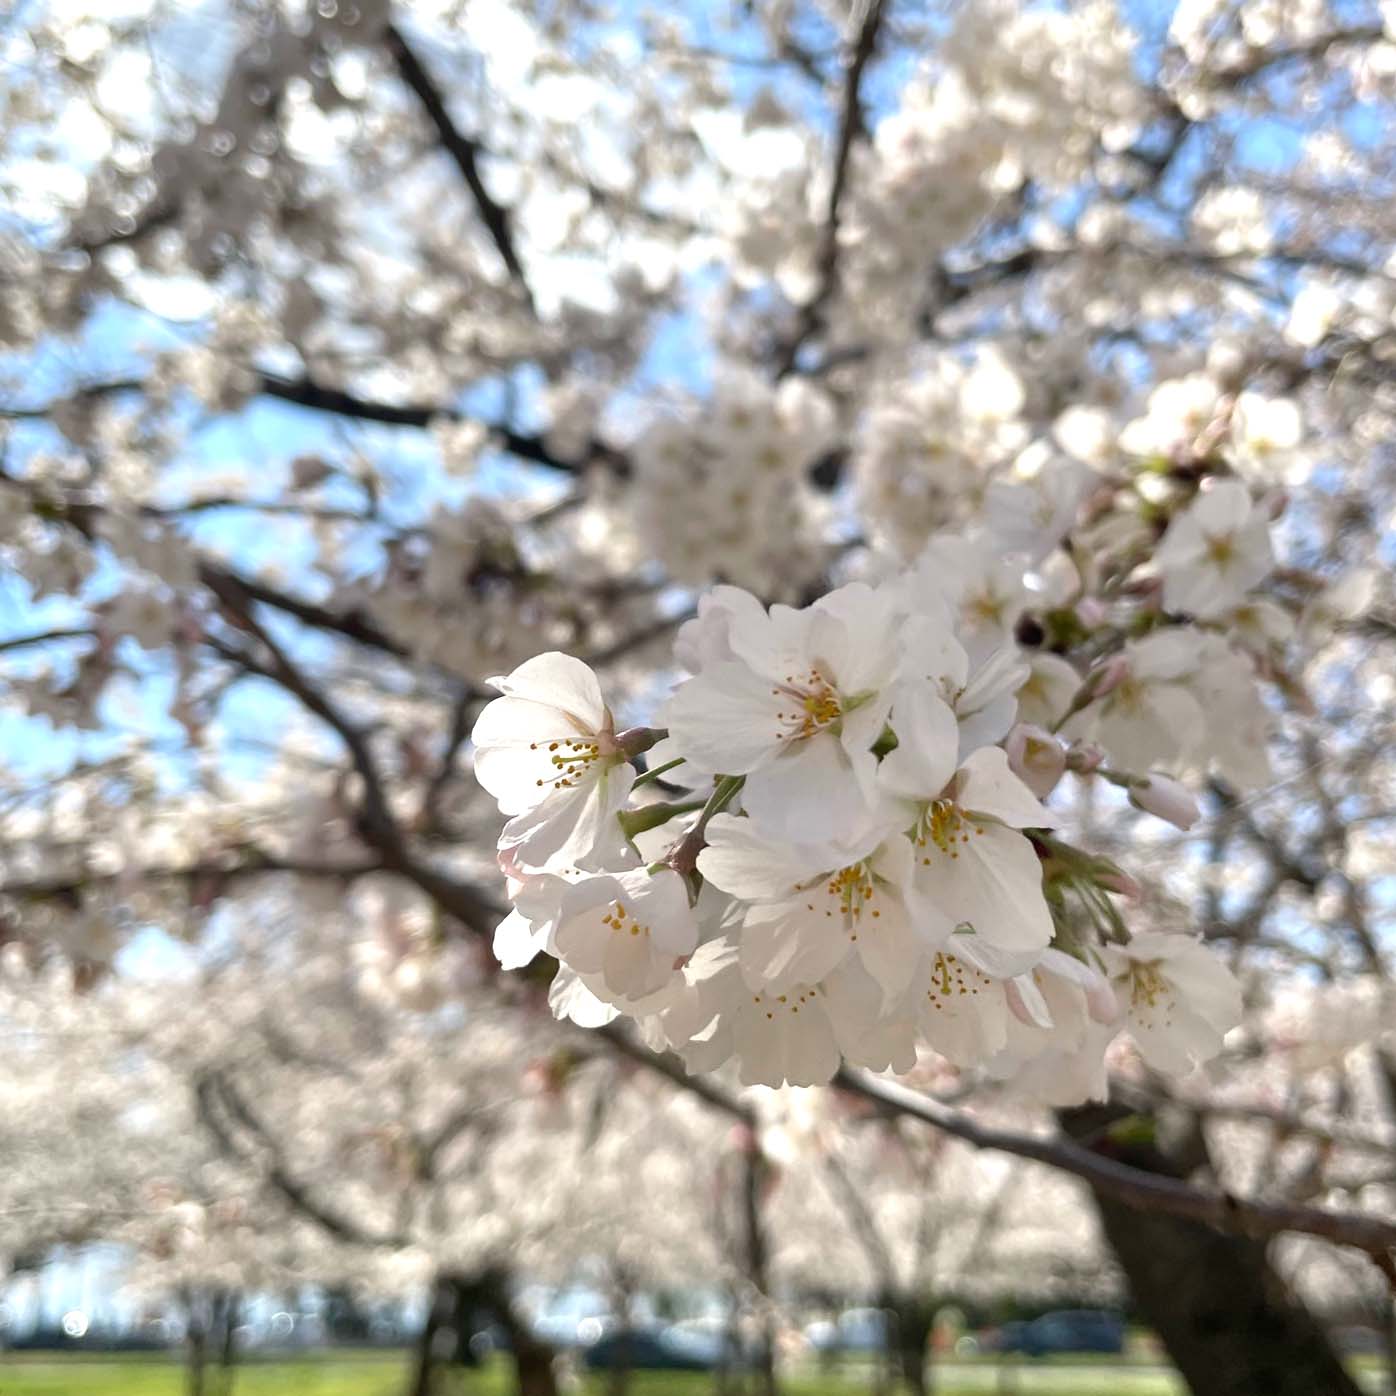 The Tidal Basin is one of the most popular areas to see the cherry blossoms.